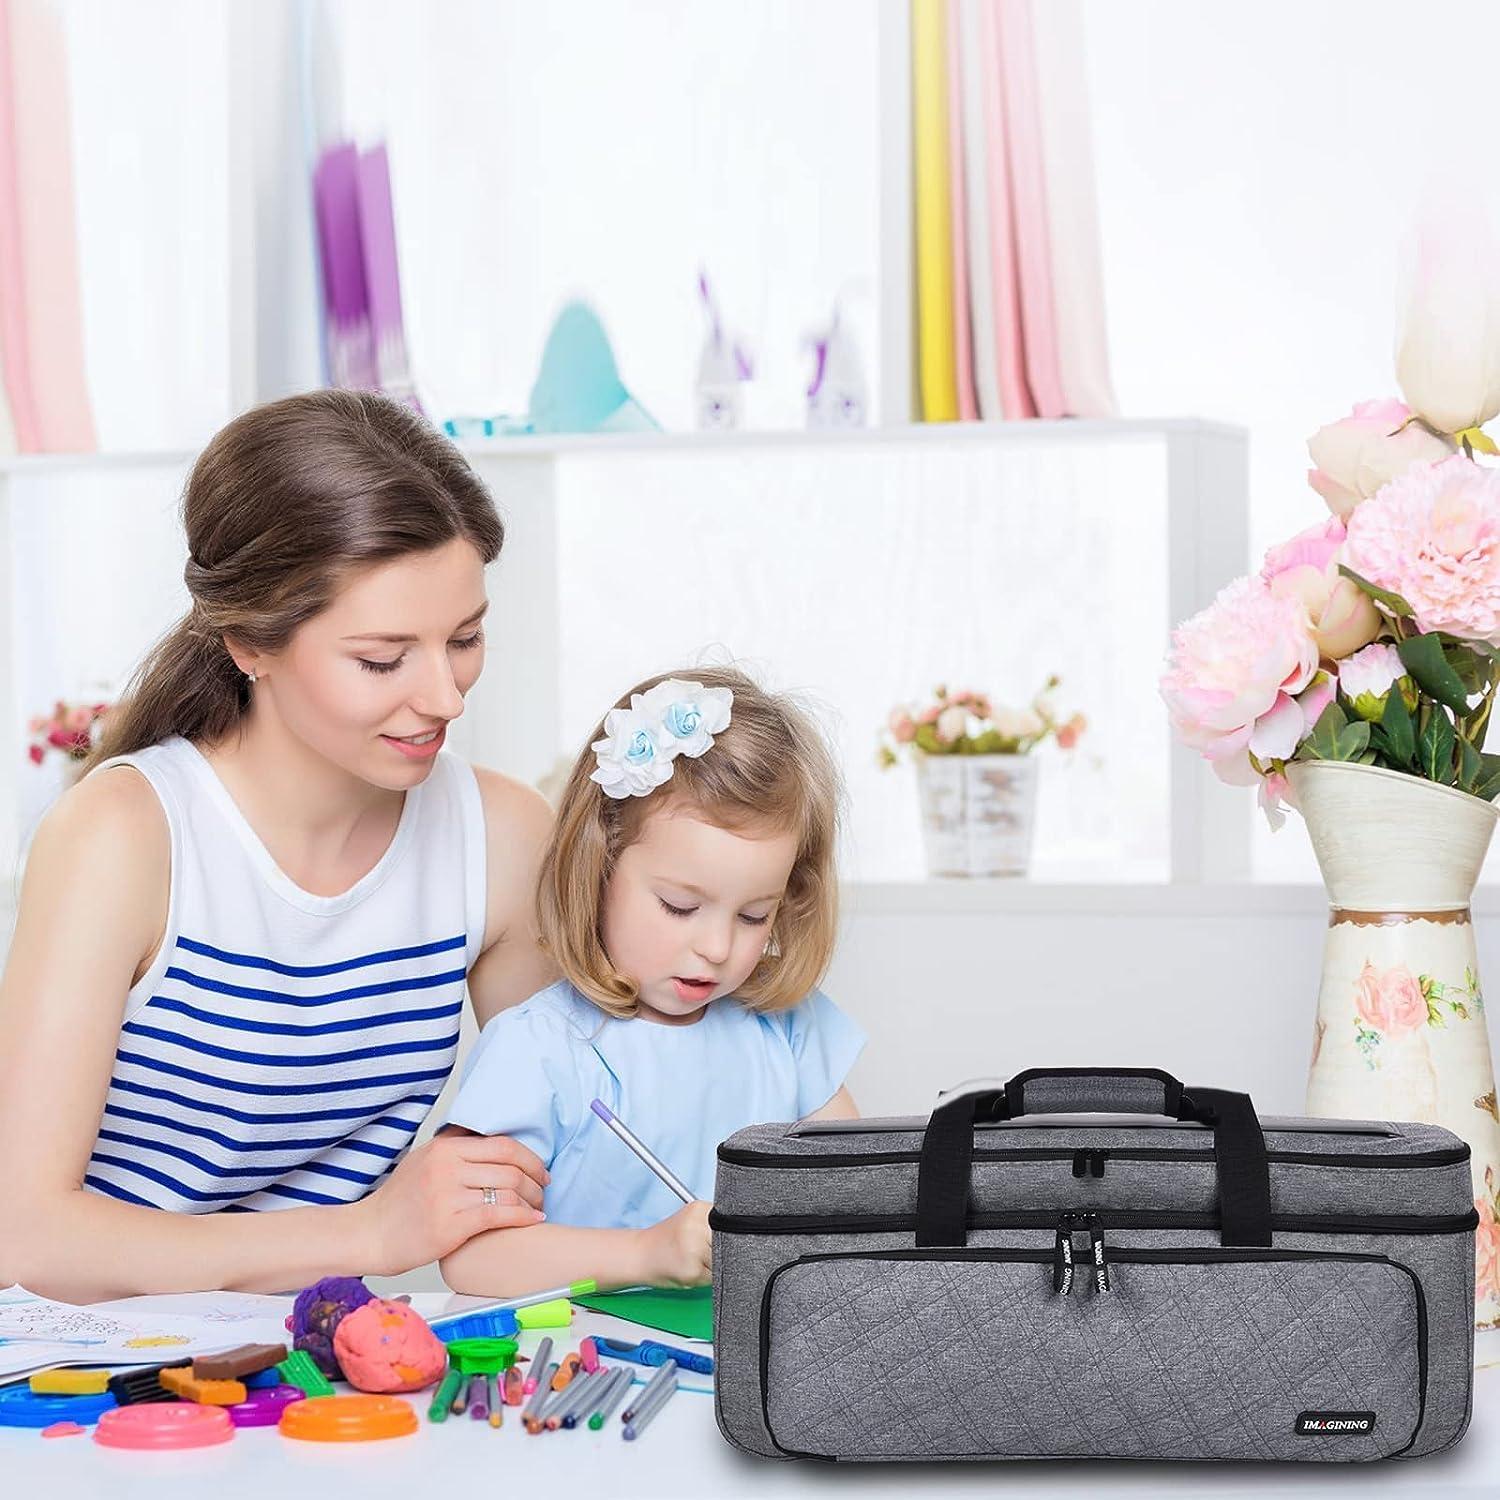 IMAGINING IMAgININg carrying case Bag compatible with cricut Maker